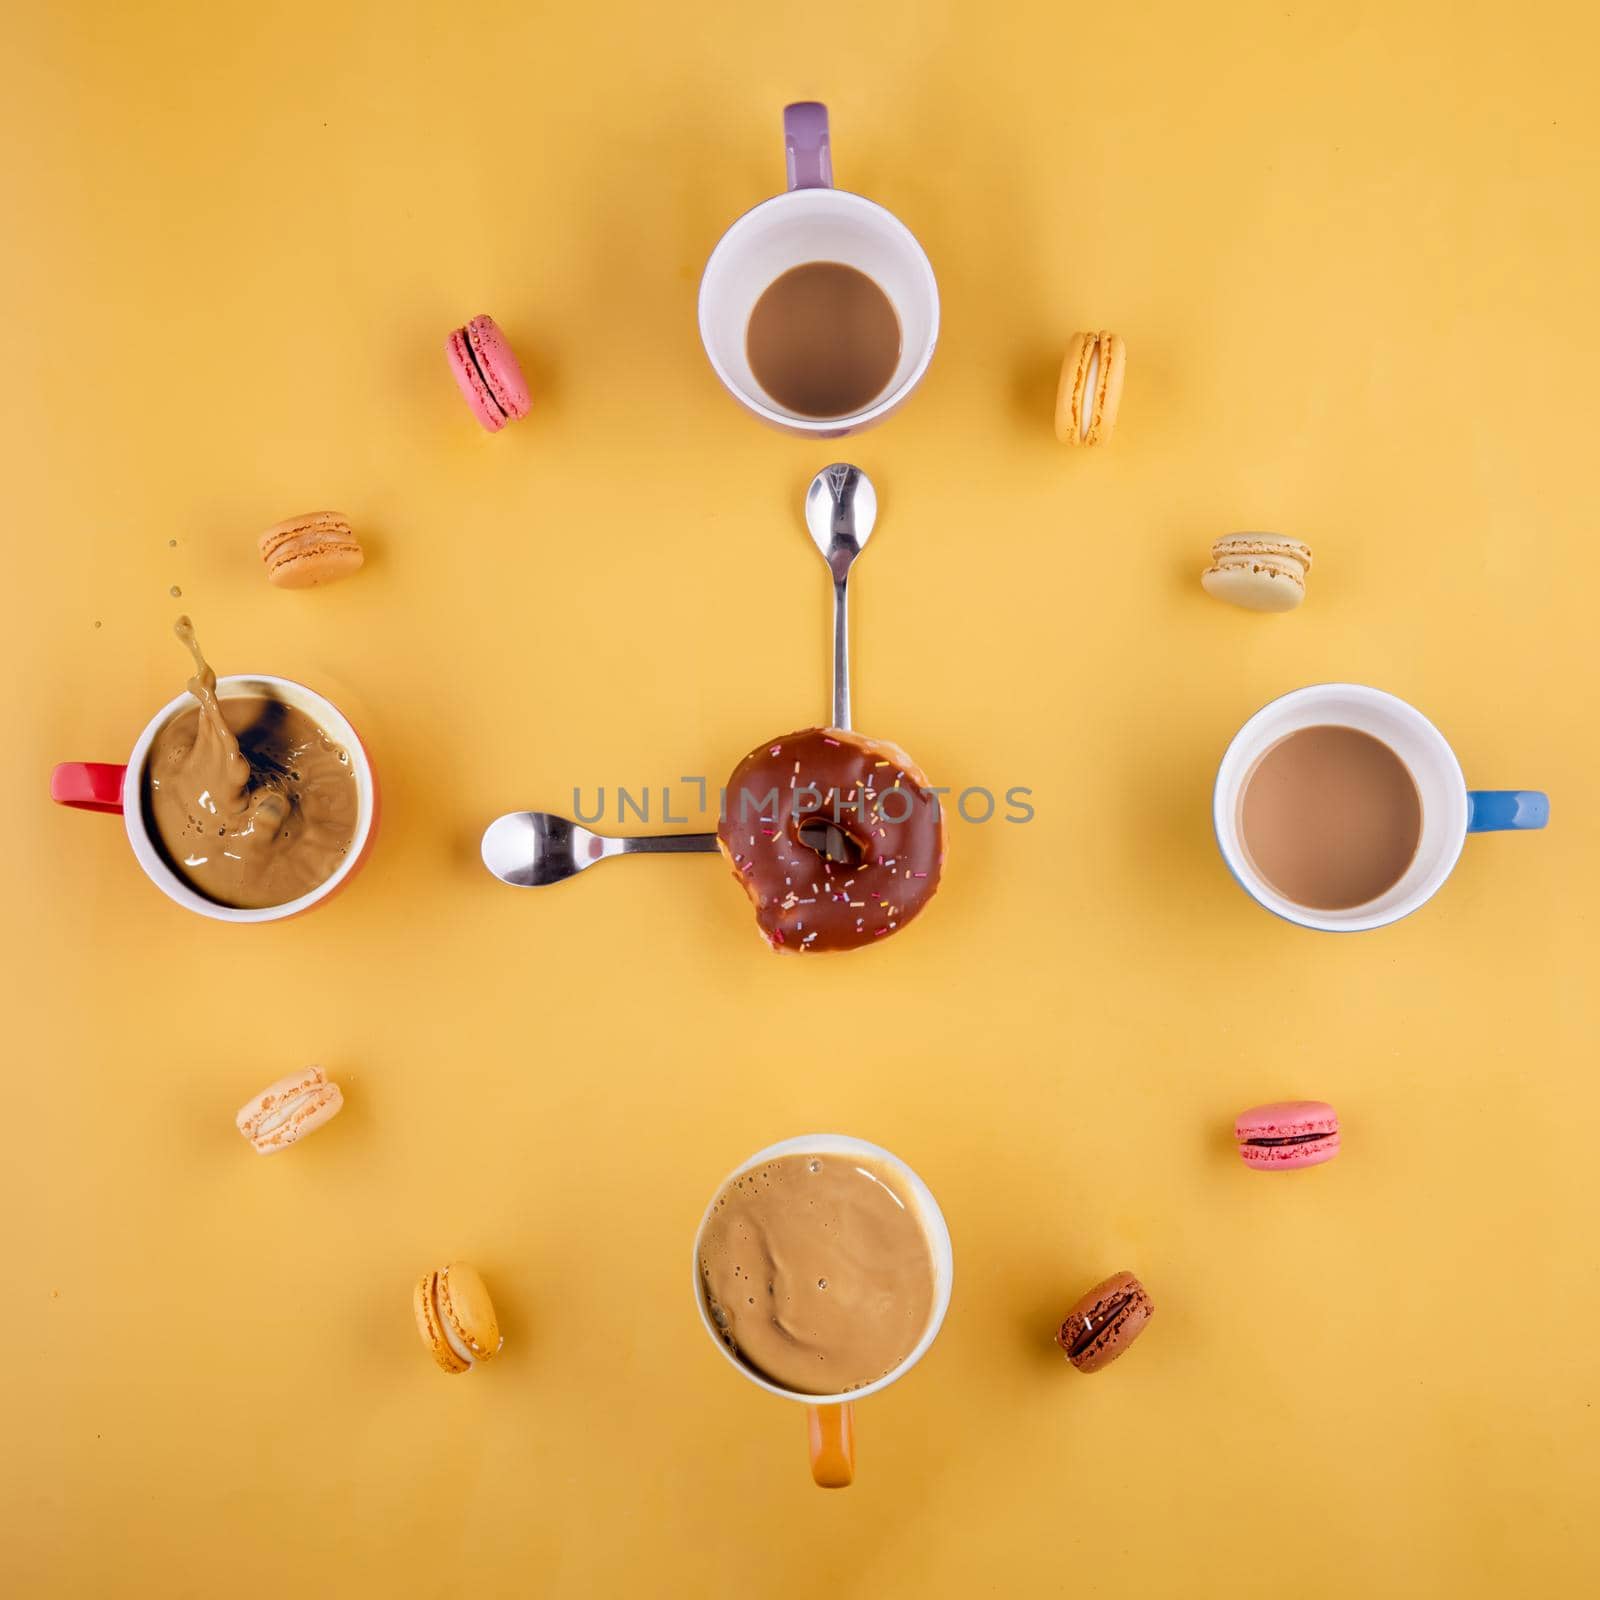 cups of coffee arranged like numbers in a clock, in the middle a donut and spoons like clock hands on yellow background by Iryna_Melnyk